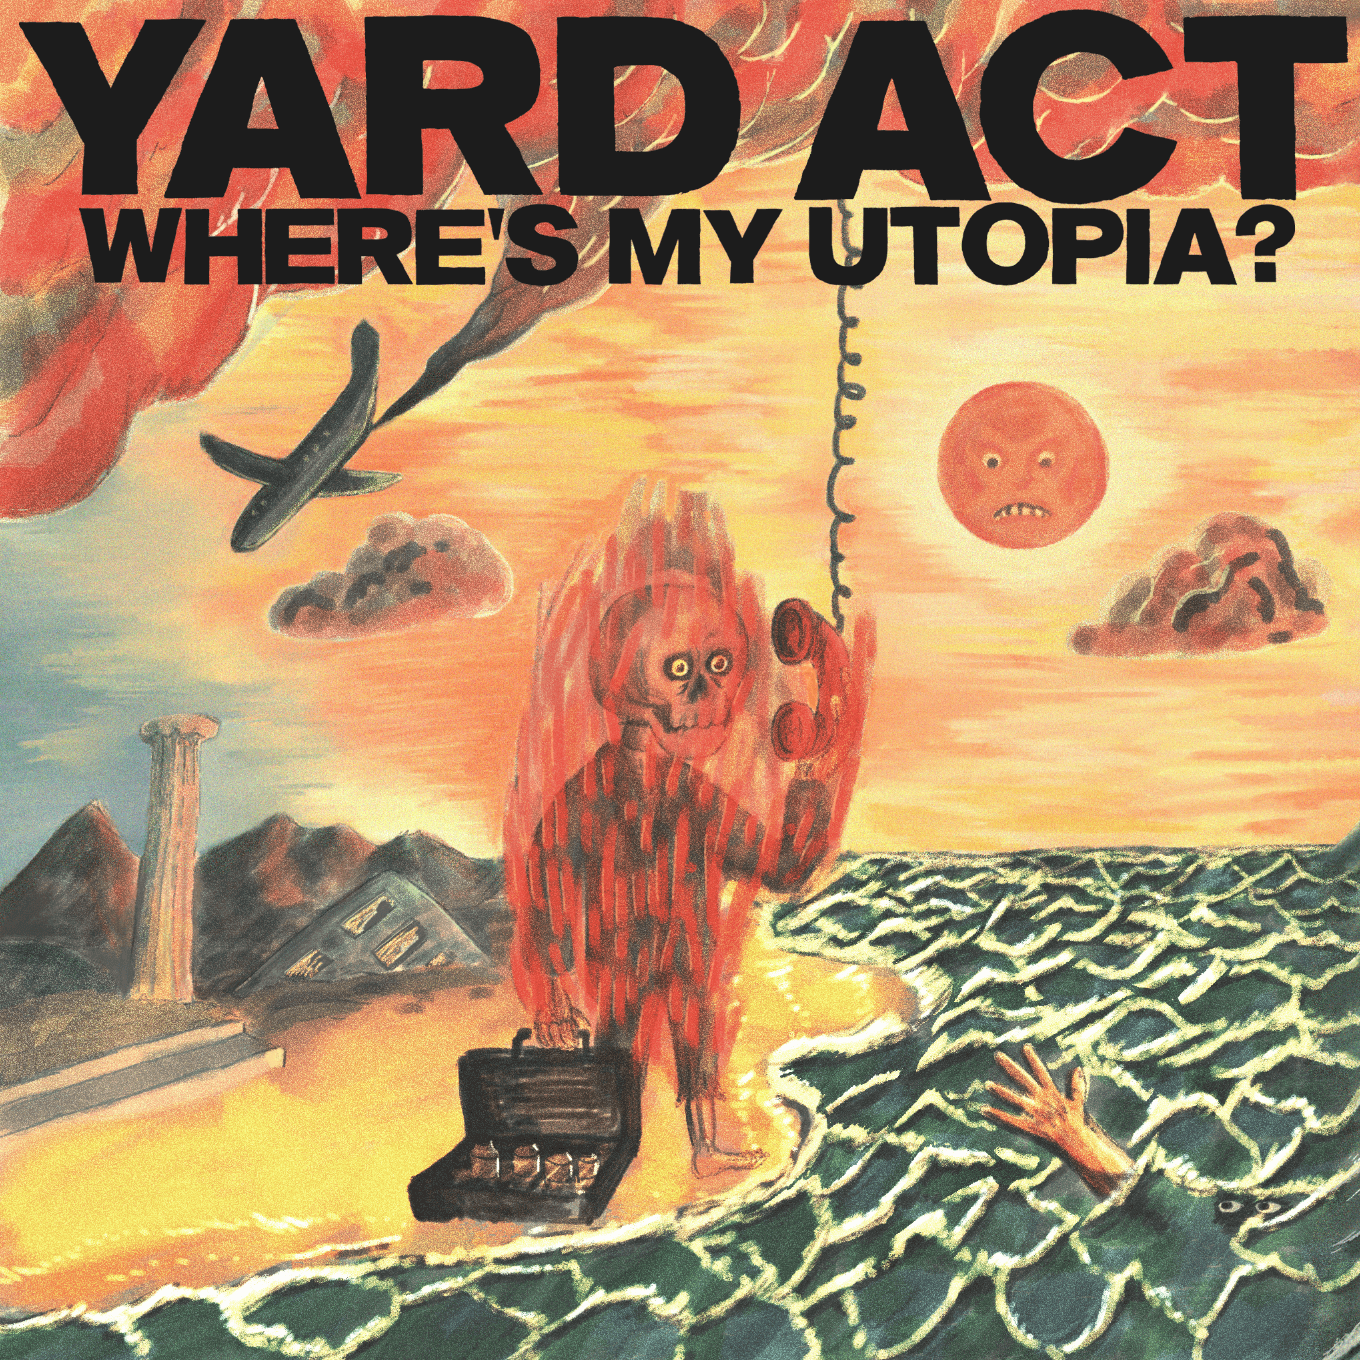 UK band Yard Act have today announced their new album Where My Utopia?, will drop on March 1st via Island Records